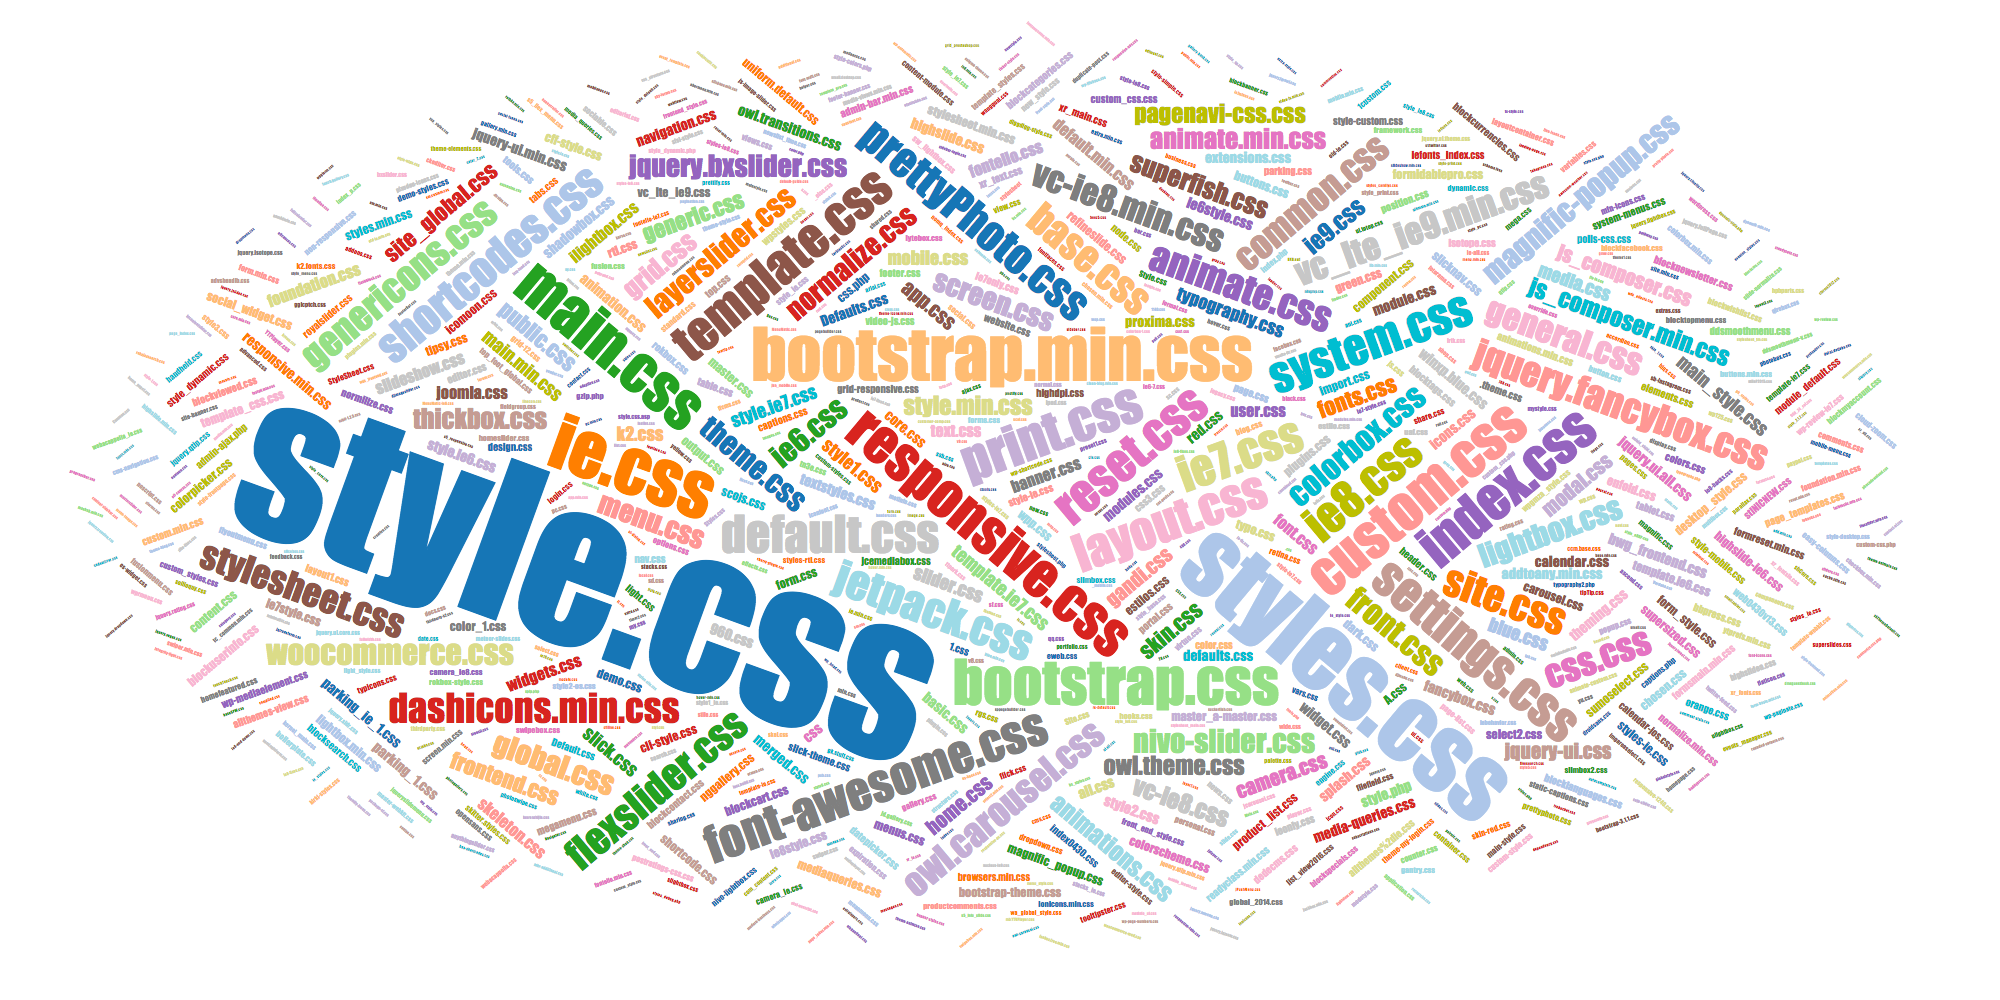 Popular names of CSS files ie.css, ie8.css, etc.